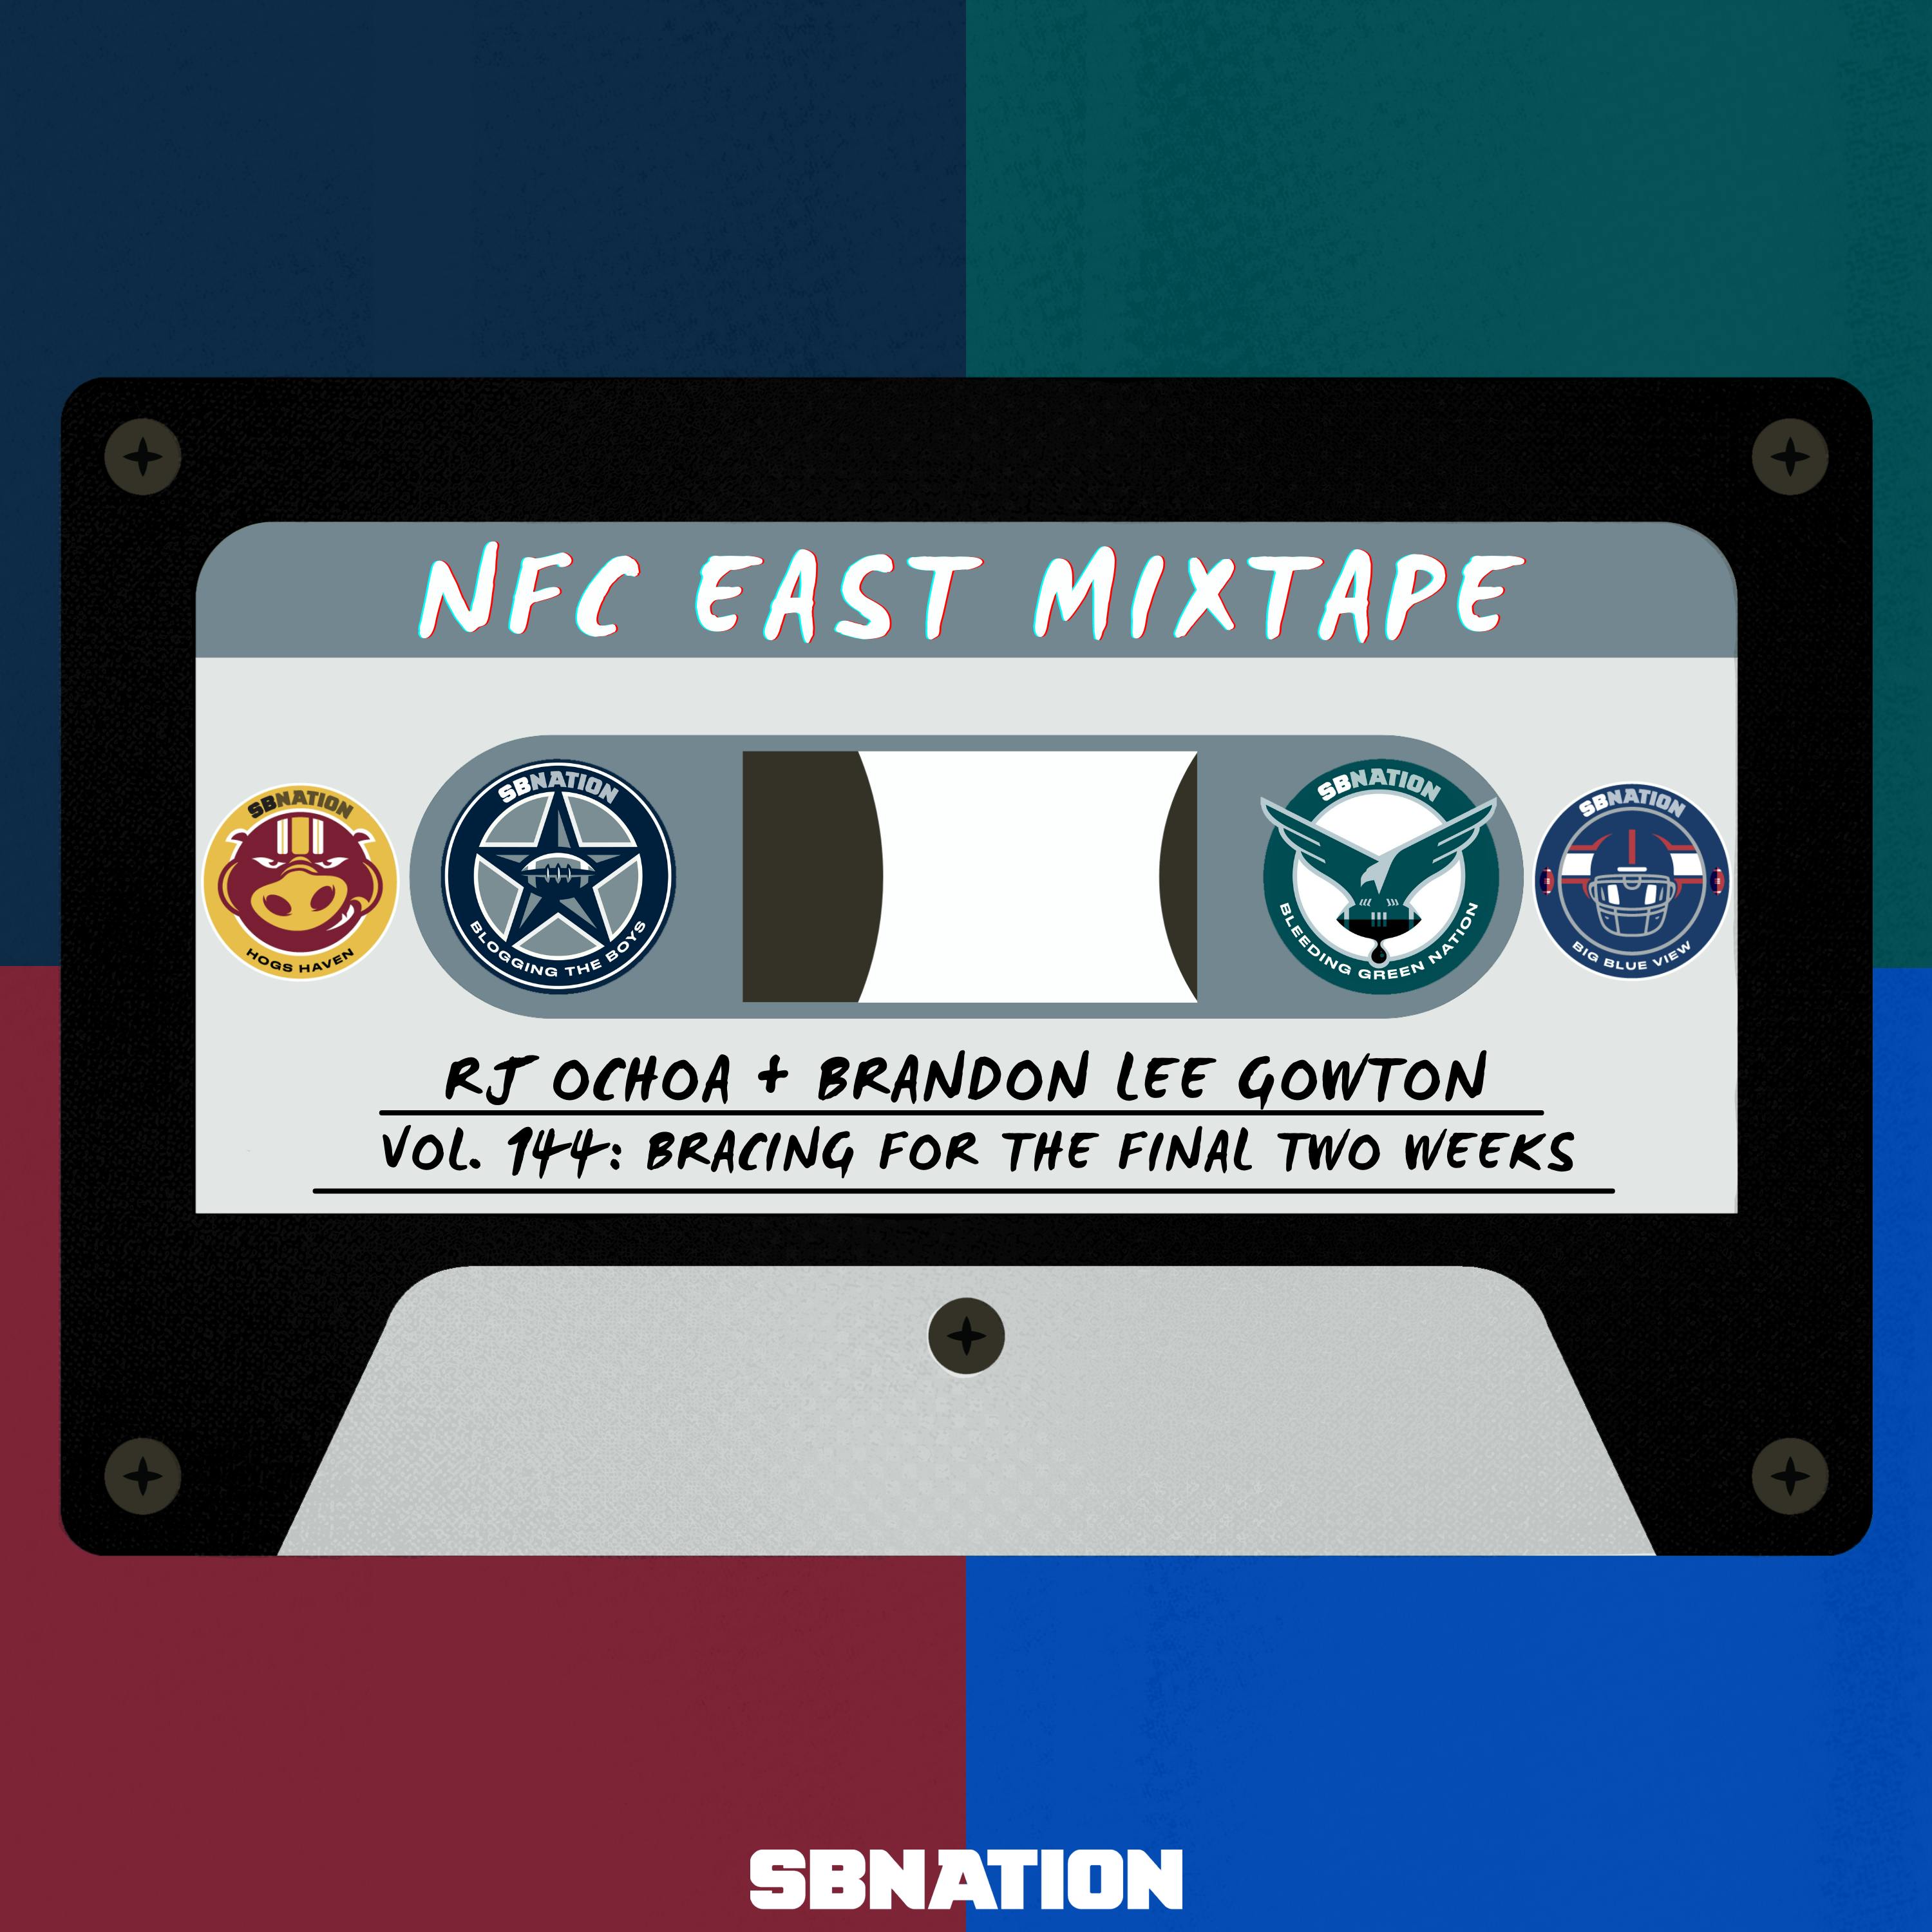 NFC East Mixtape Vol.144: Bracing for the final two weeks